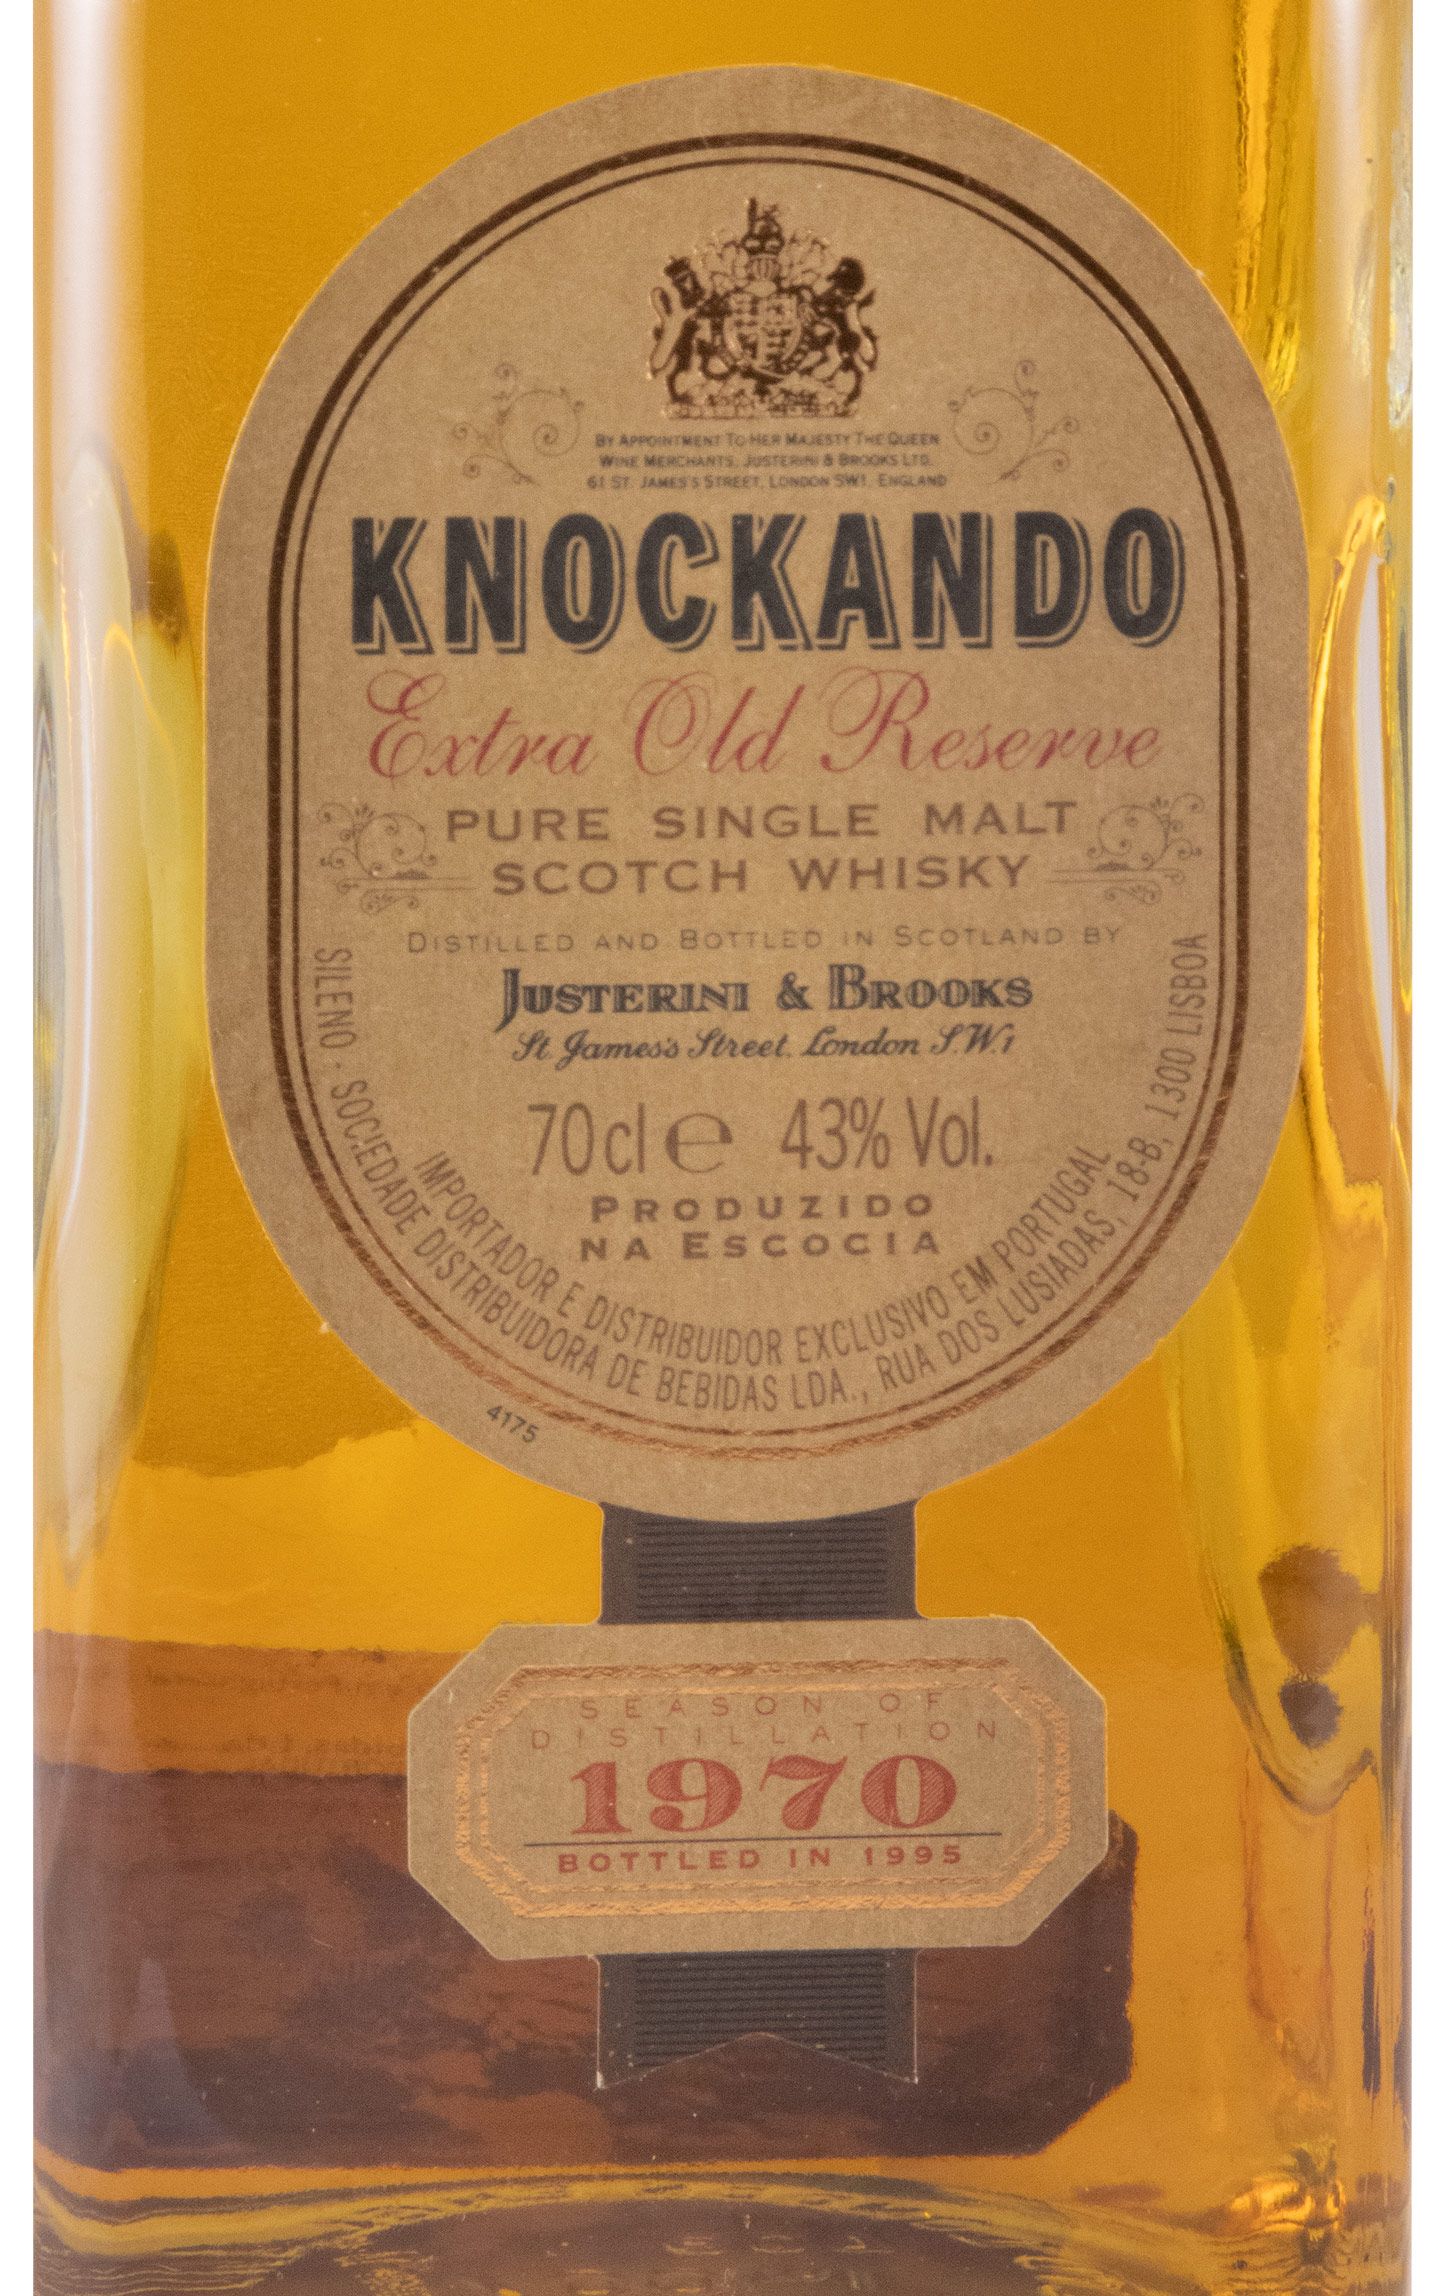 1970 Knockando Extra Old Reserve (bottled in 1995)